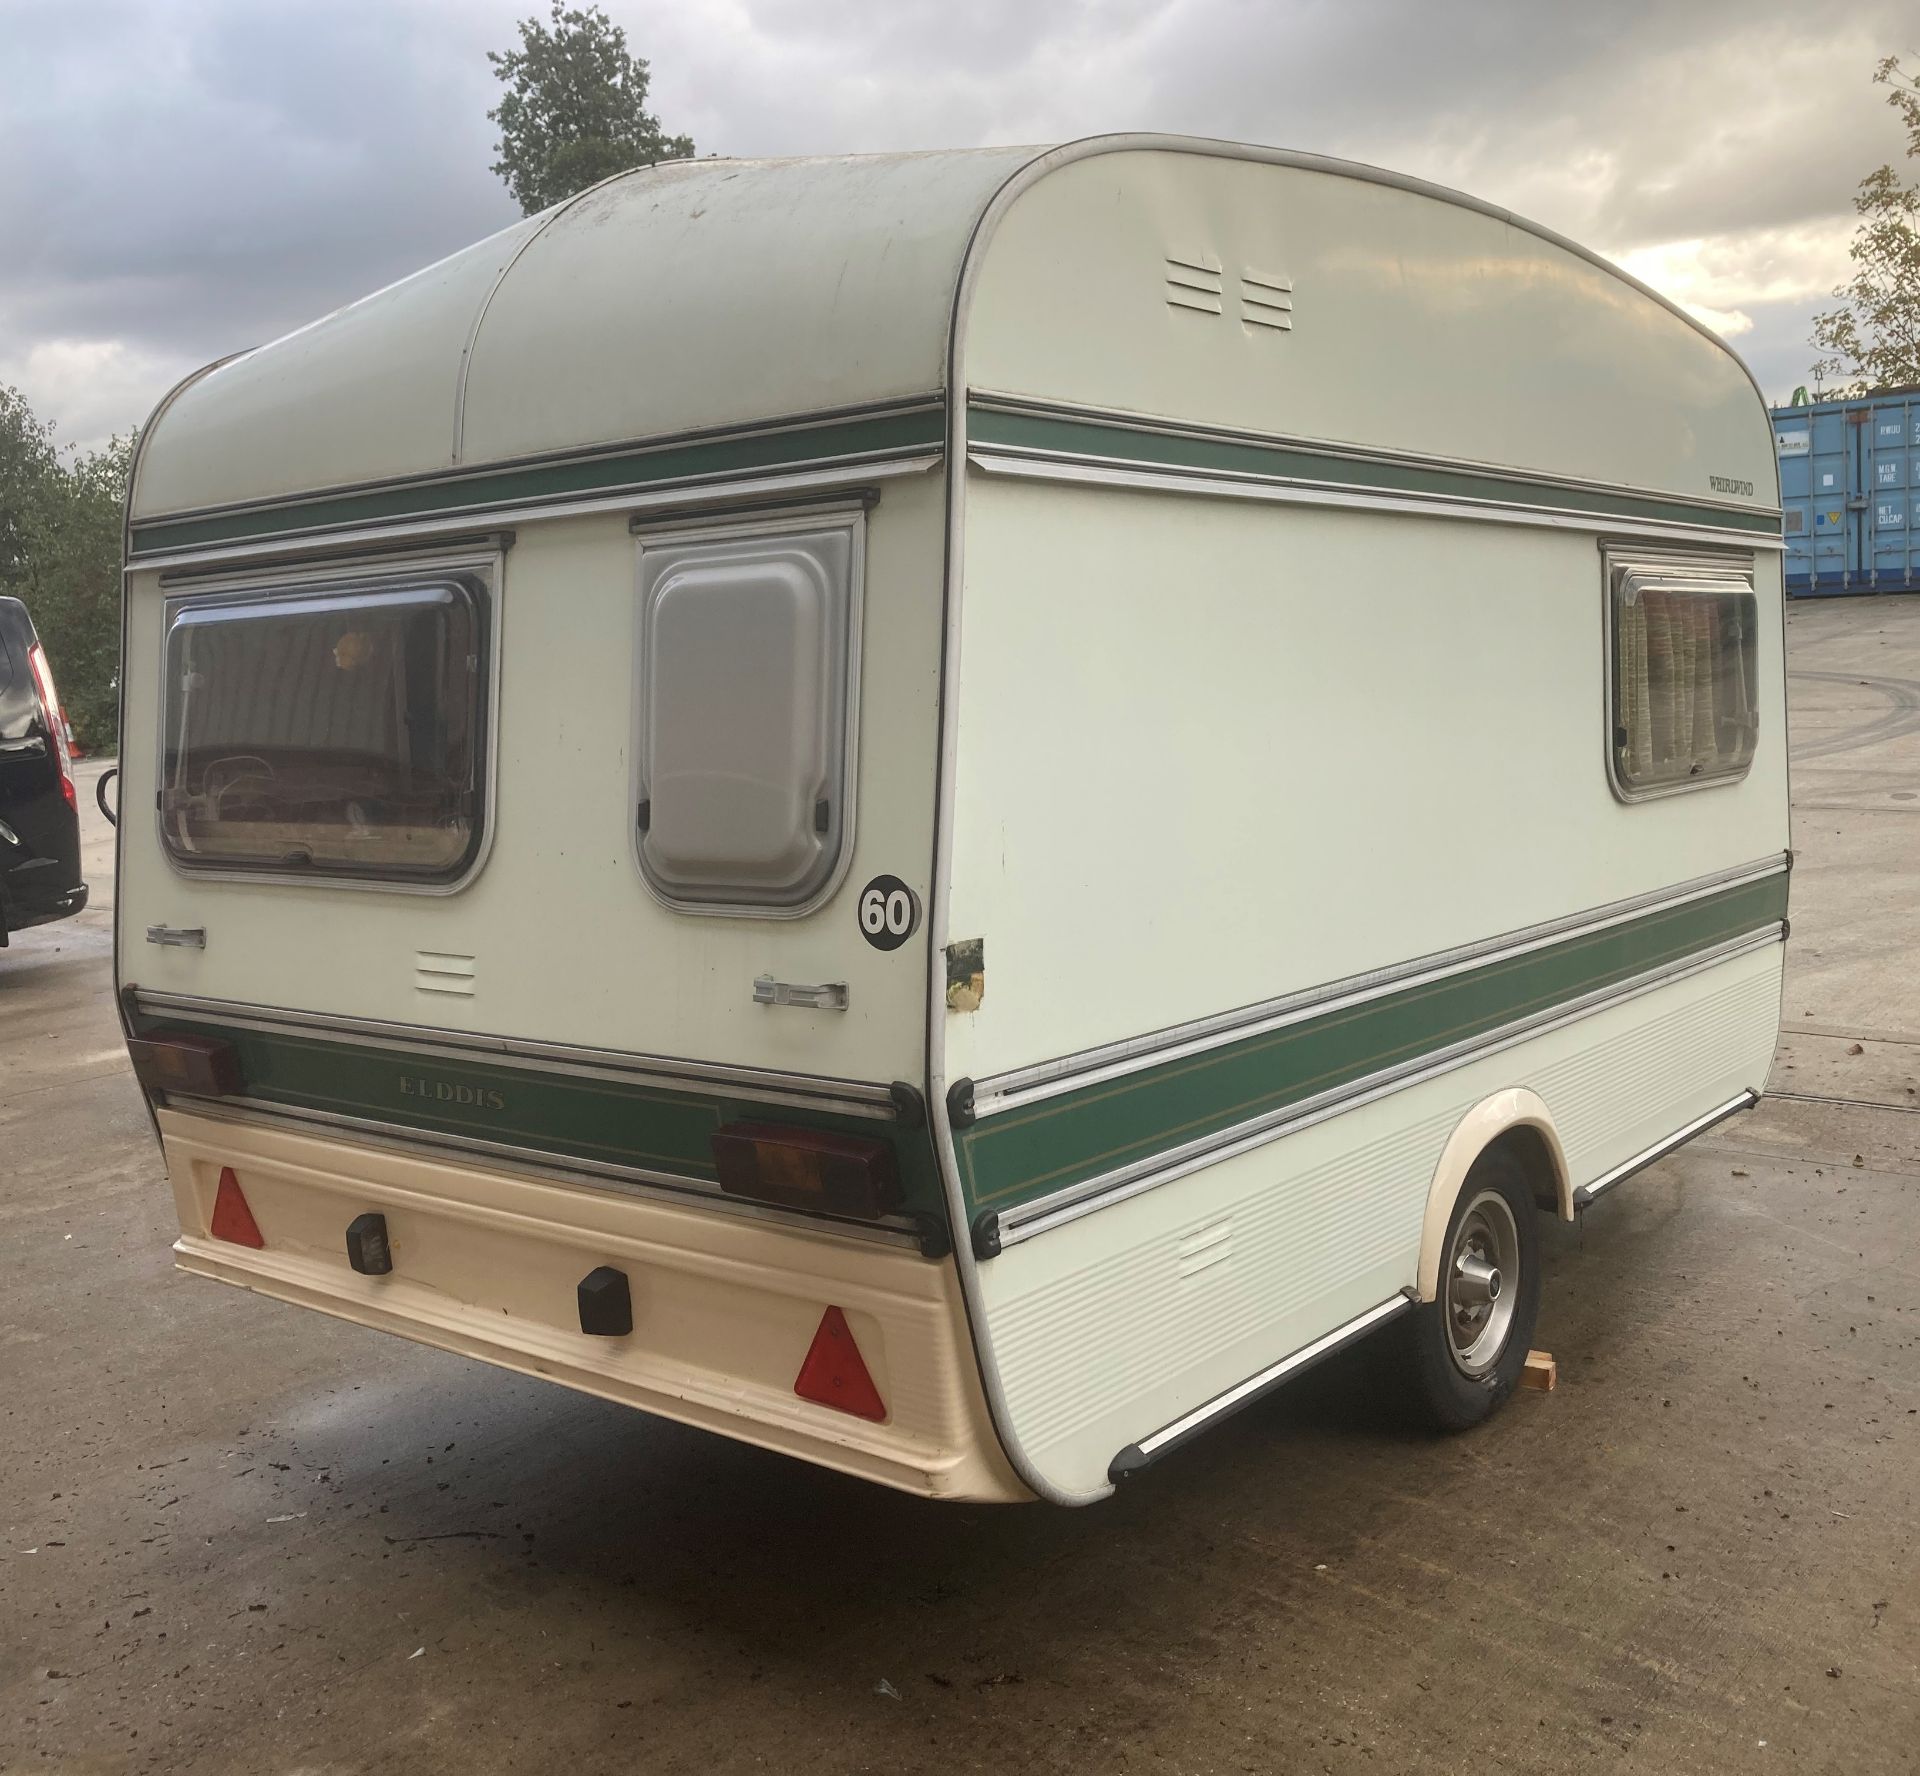 AN ELDDIS WHIRLWIND TWO BERTH TOURING CARAVAN - White with green trim. Serial No: 11344E. - Image 8 of 8